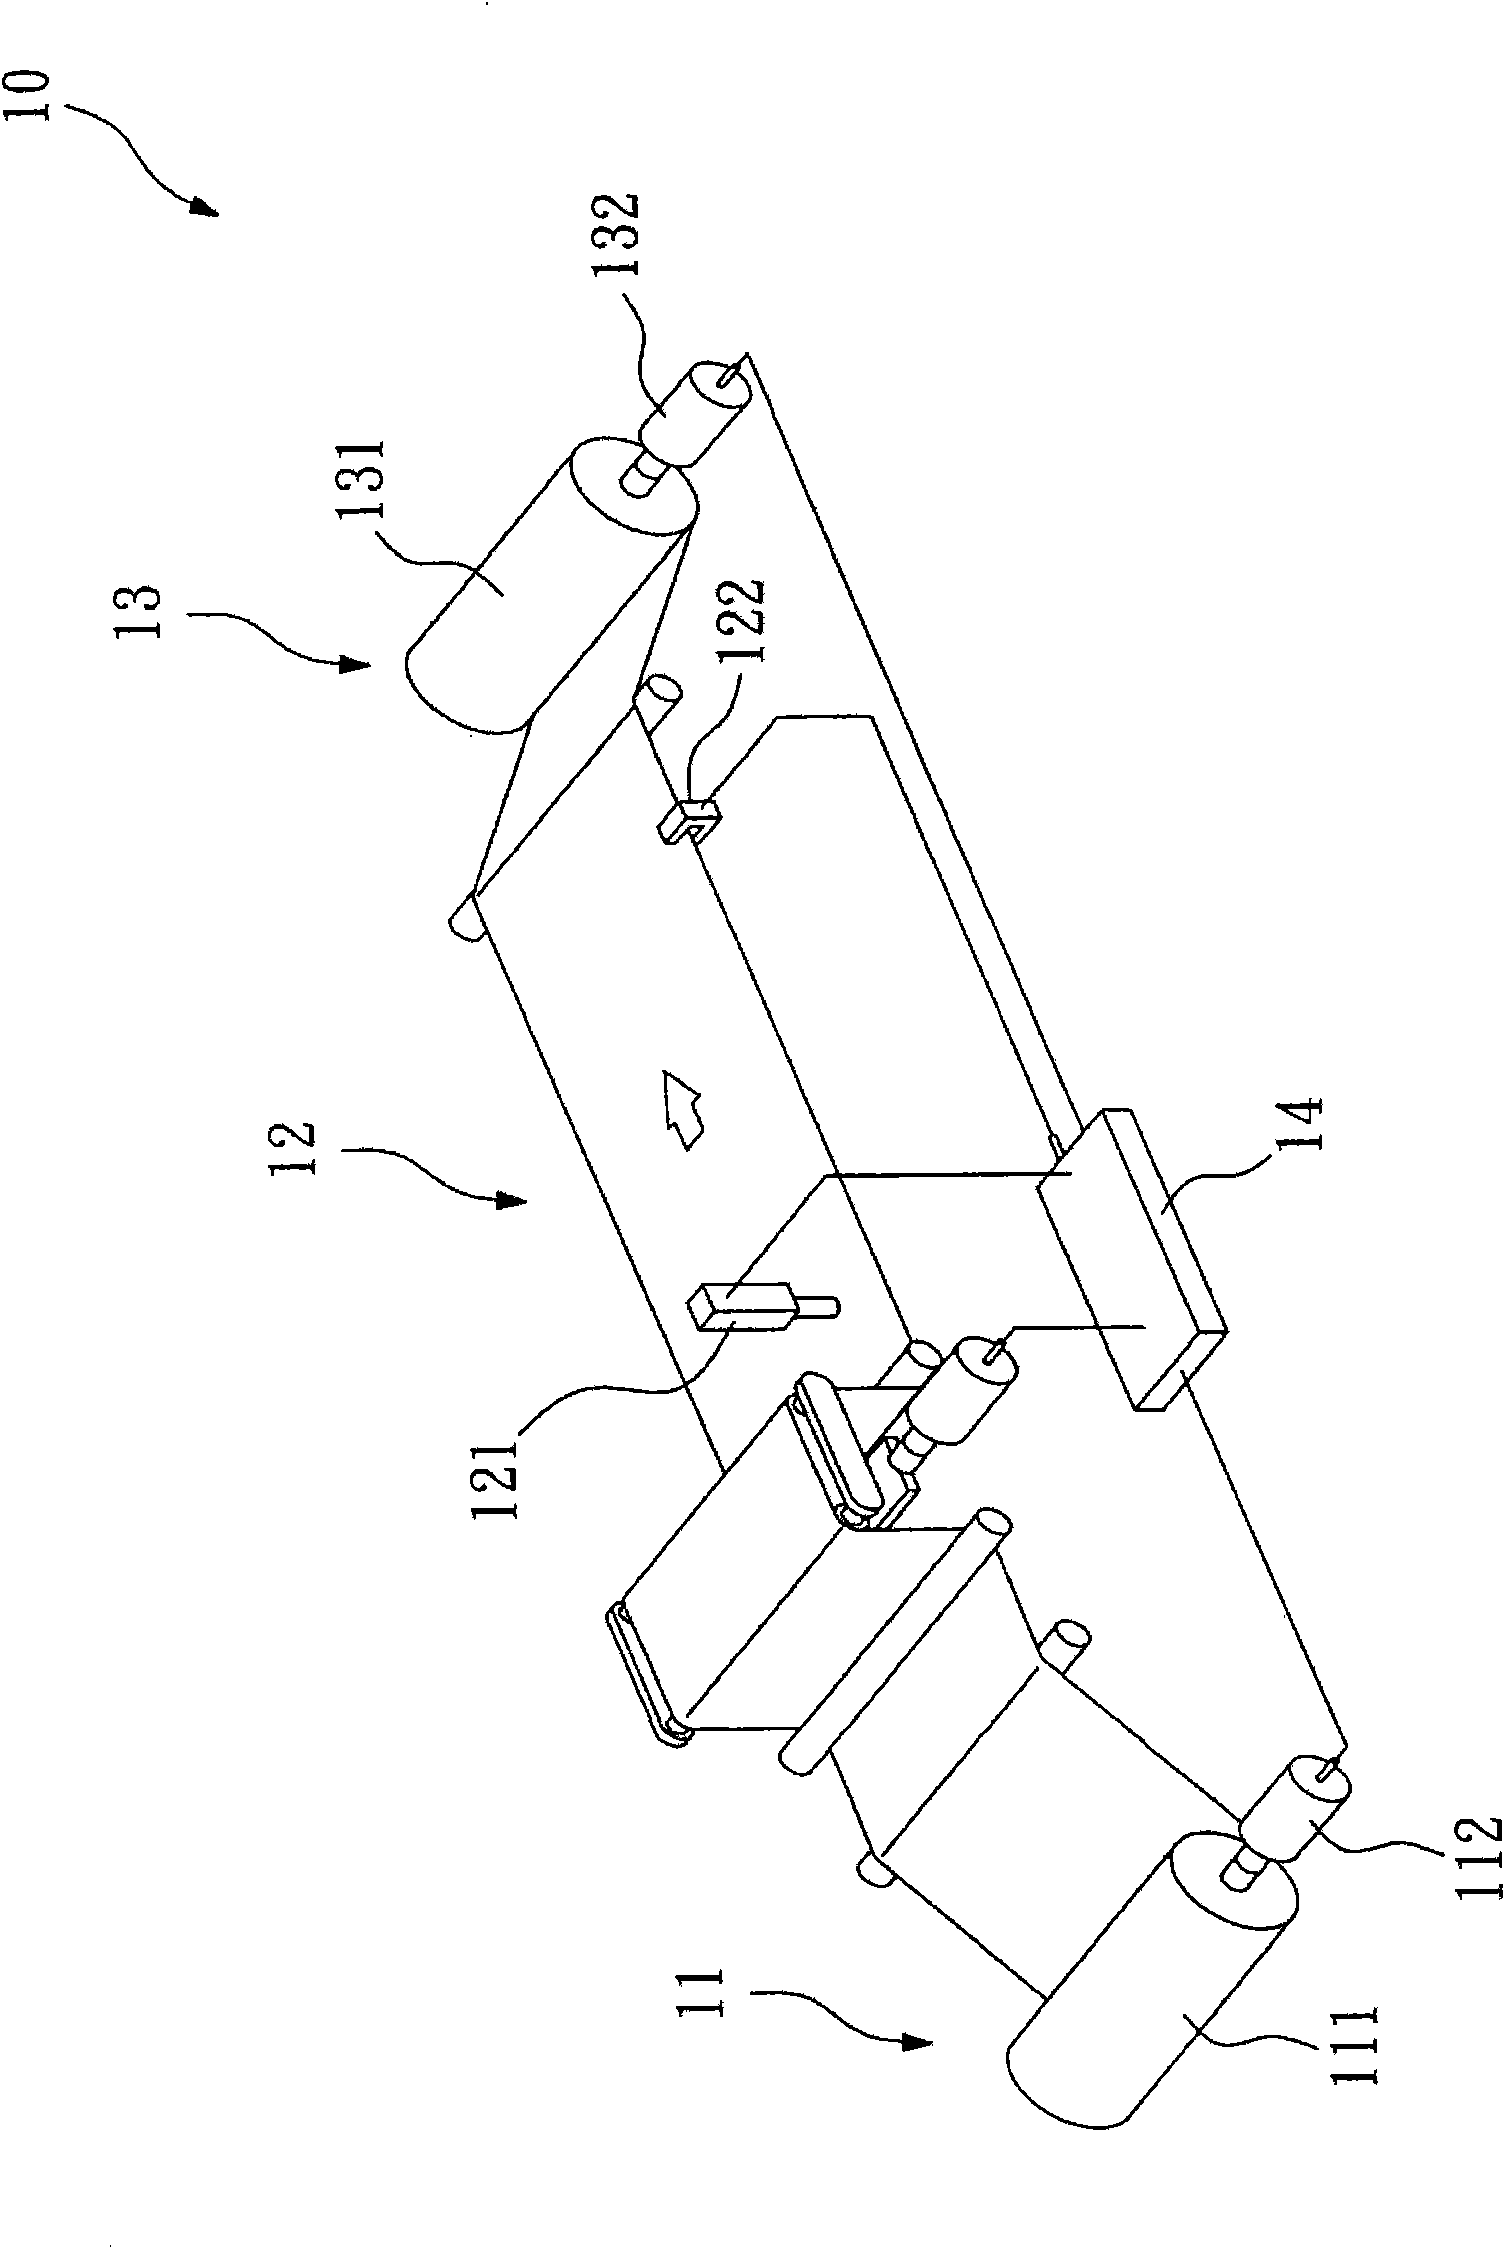 Continuous rolling clamping device for flexible substrate